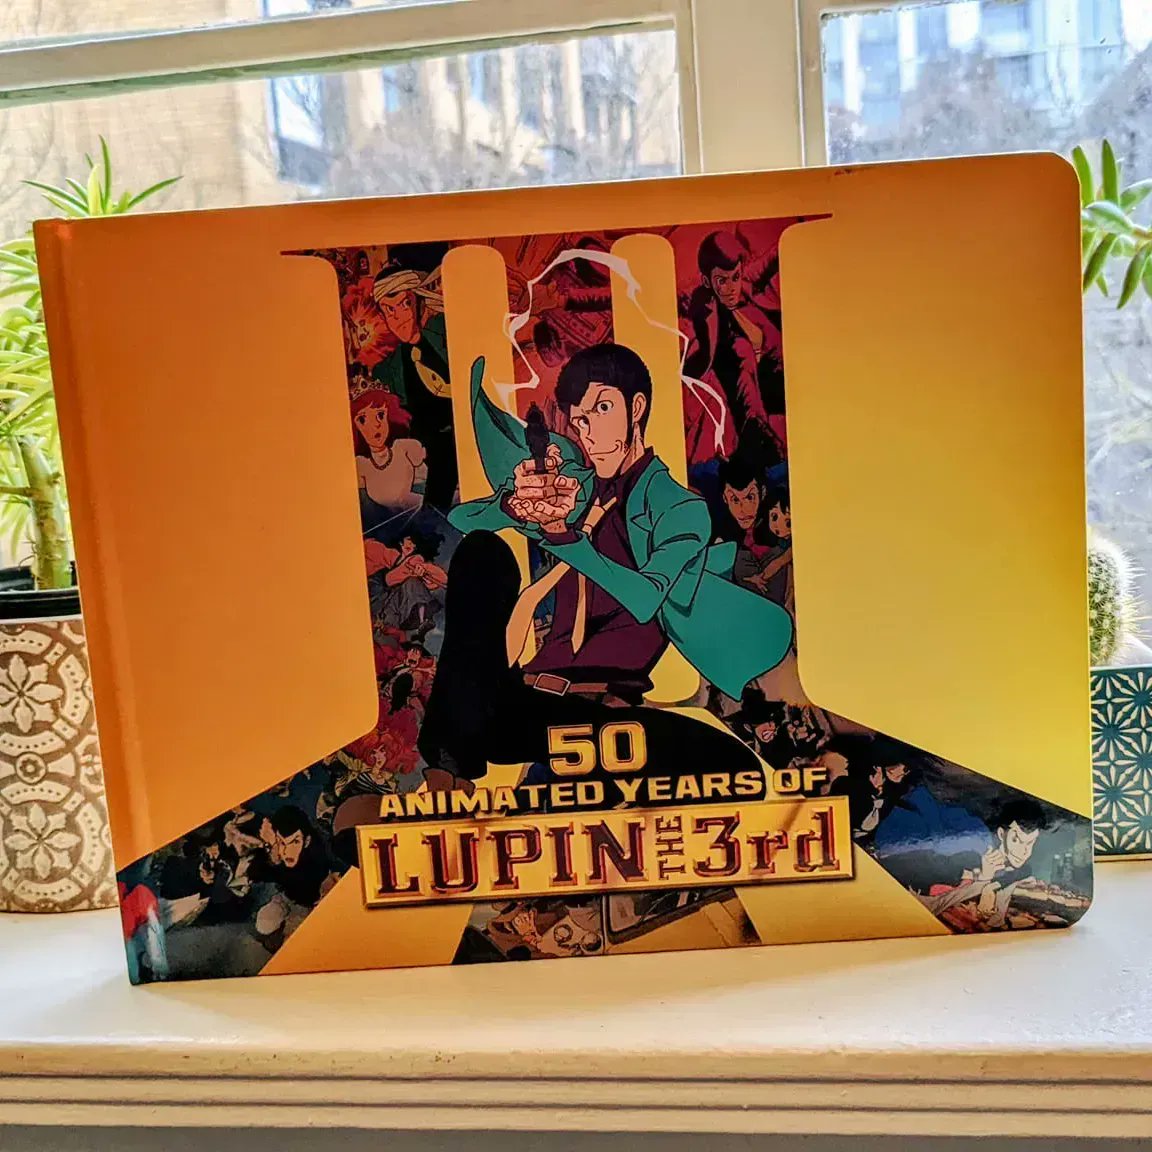 50 Animated Years of Lupin the 3rd! Spanning 50 years of amazing action-packed stories! From TMS Entertainment, Monkey Punch Studios, and Magnetic Press! #lupinthe3rd #lupin #anime #magneticpress buff.ly/40pxqf5 #LupinIII #bookphoto